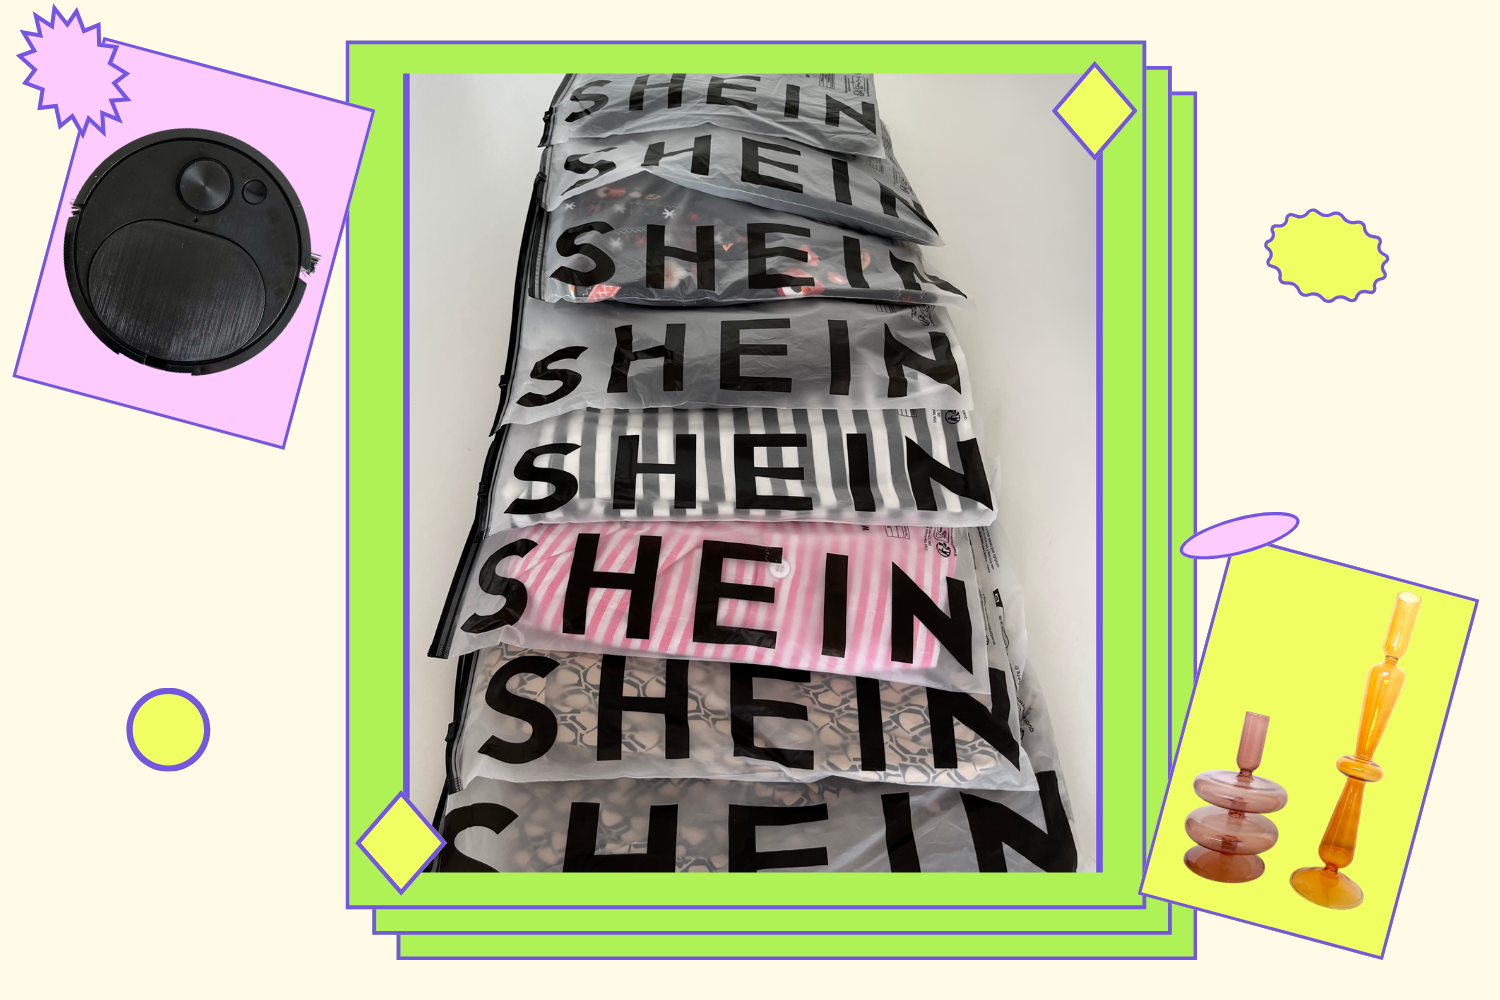 SHEIN returns are free of charge but require patience